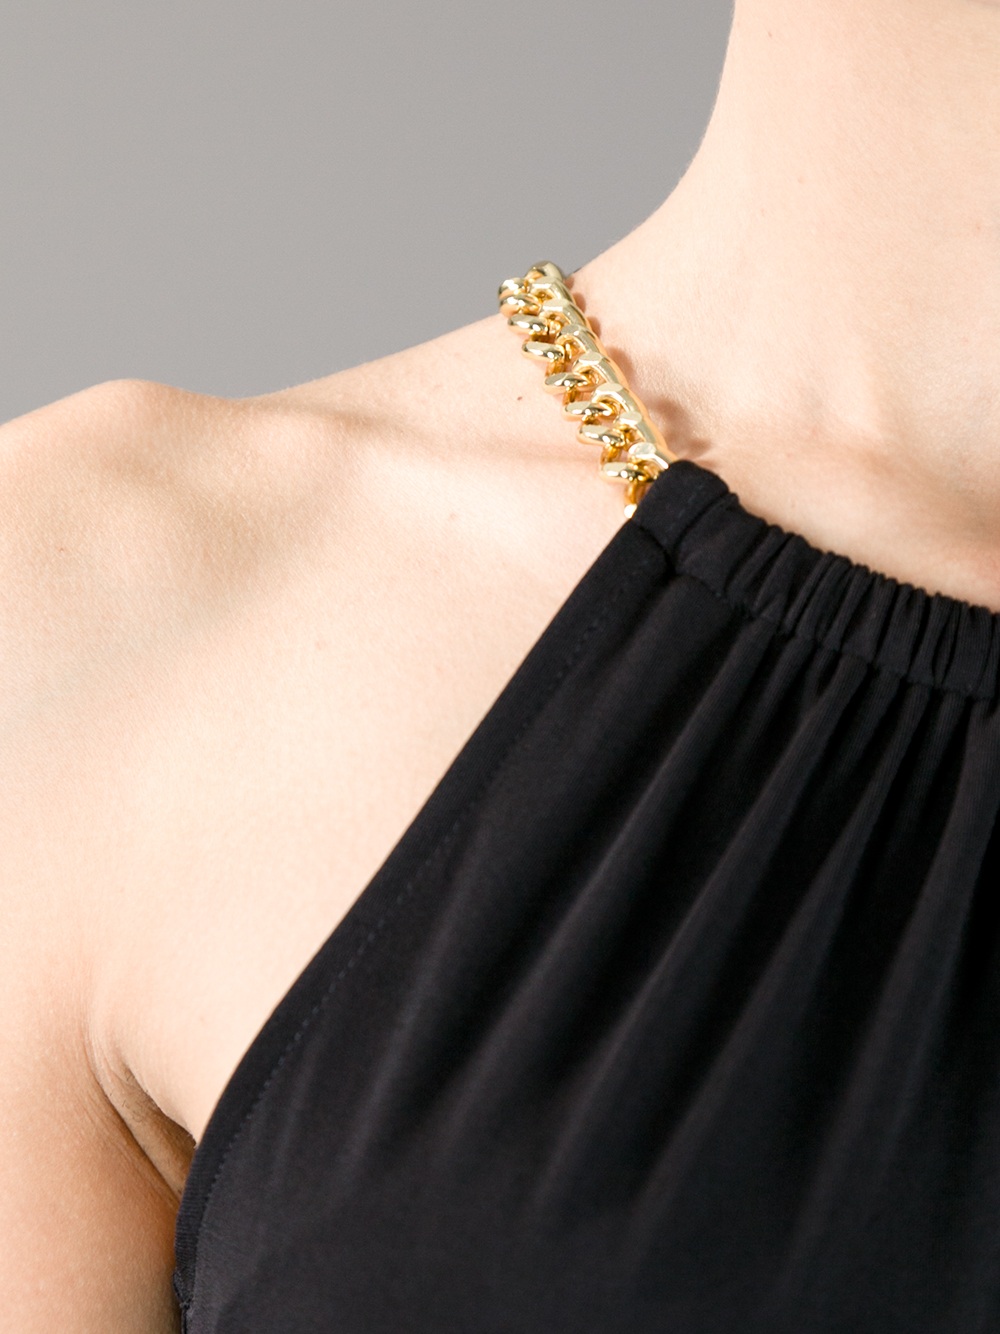 michael kors black dress with gold chain